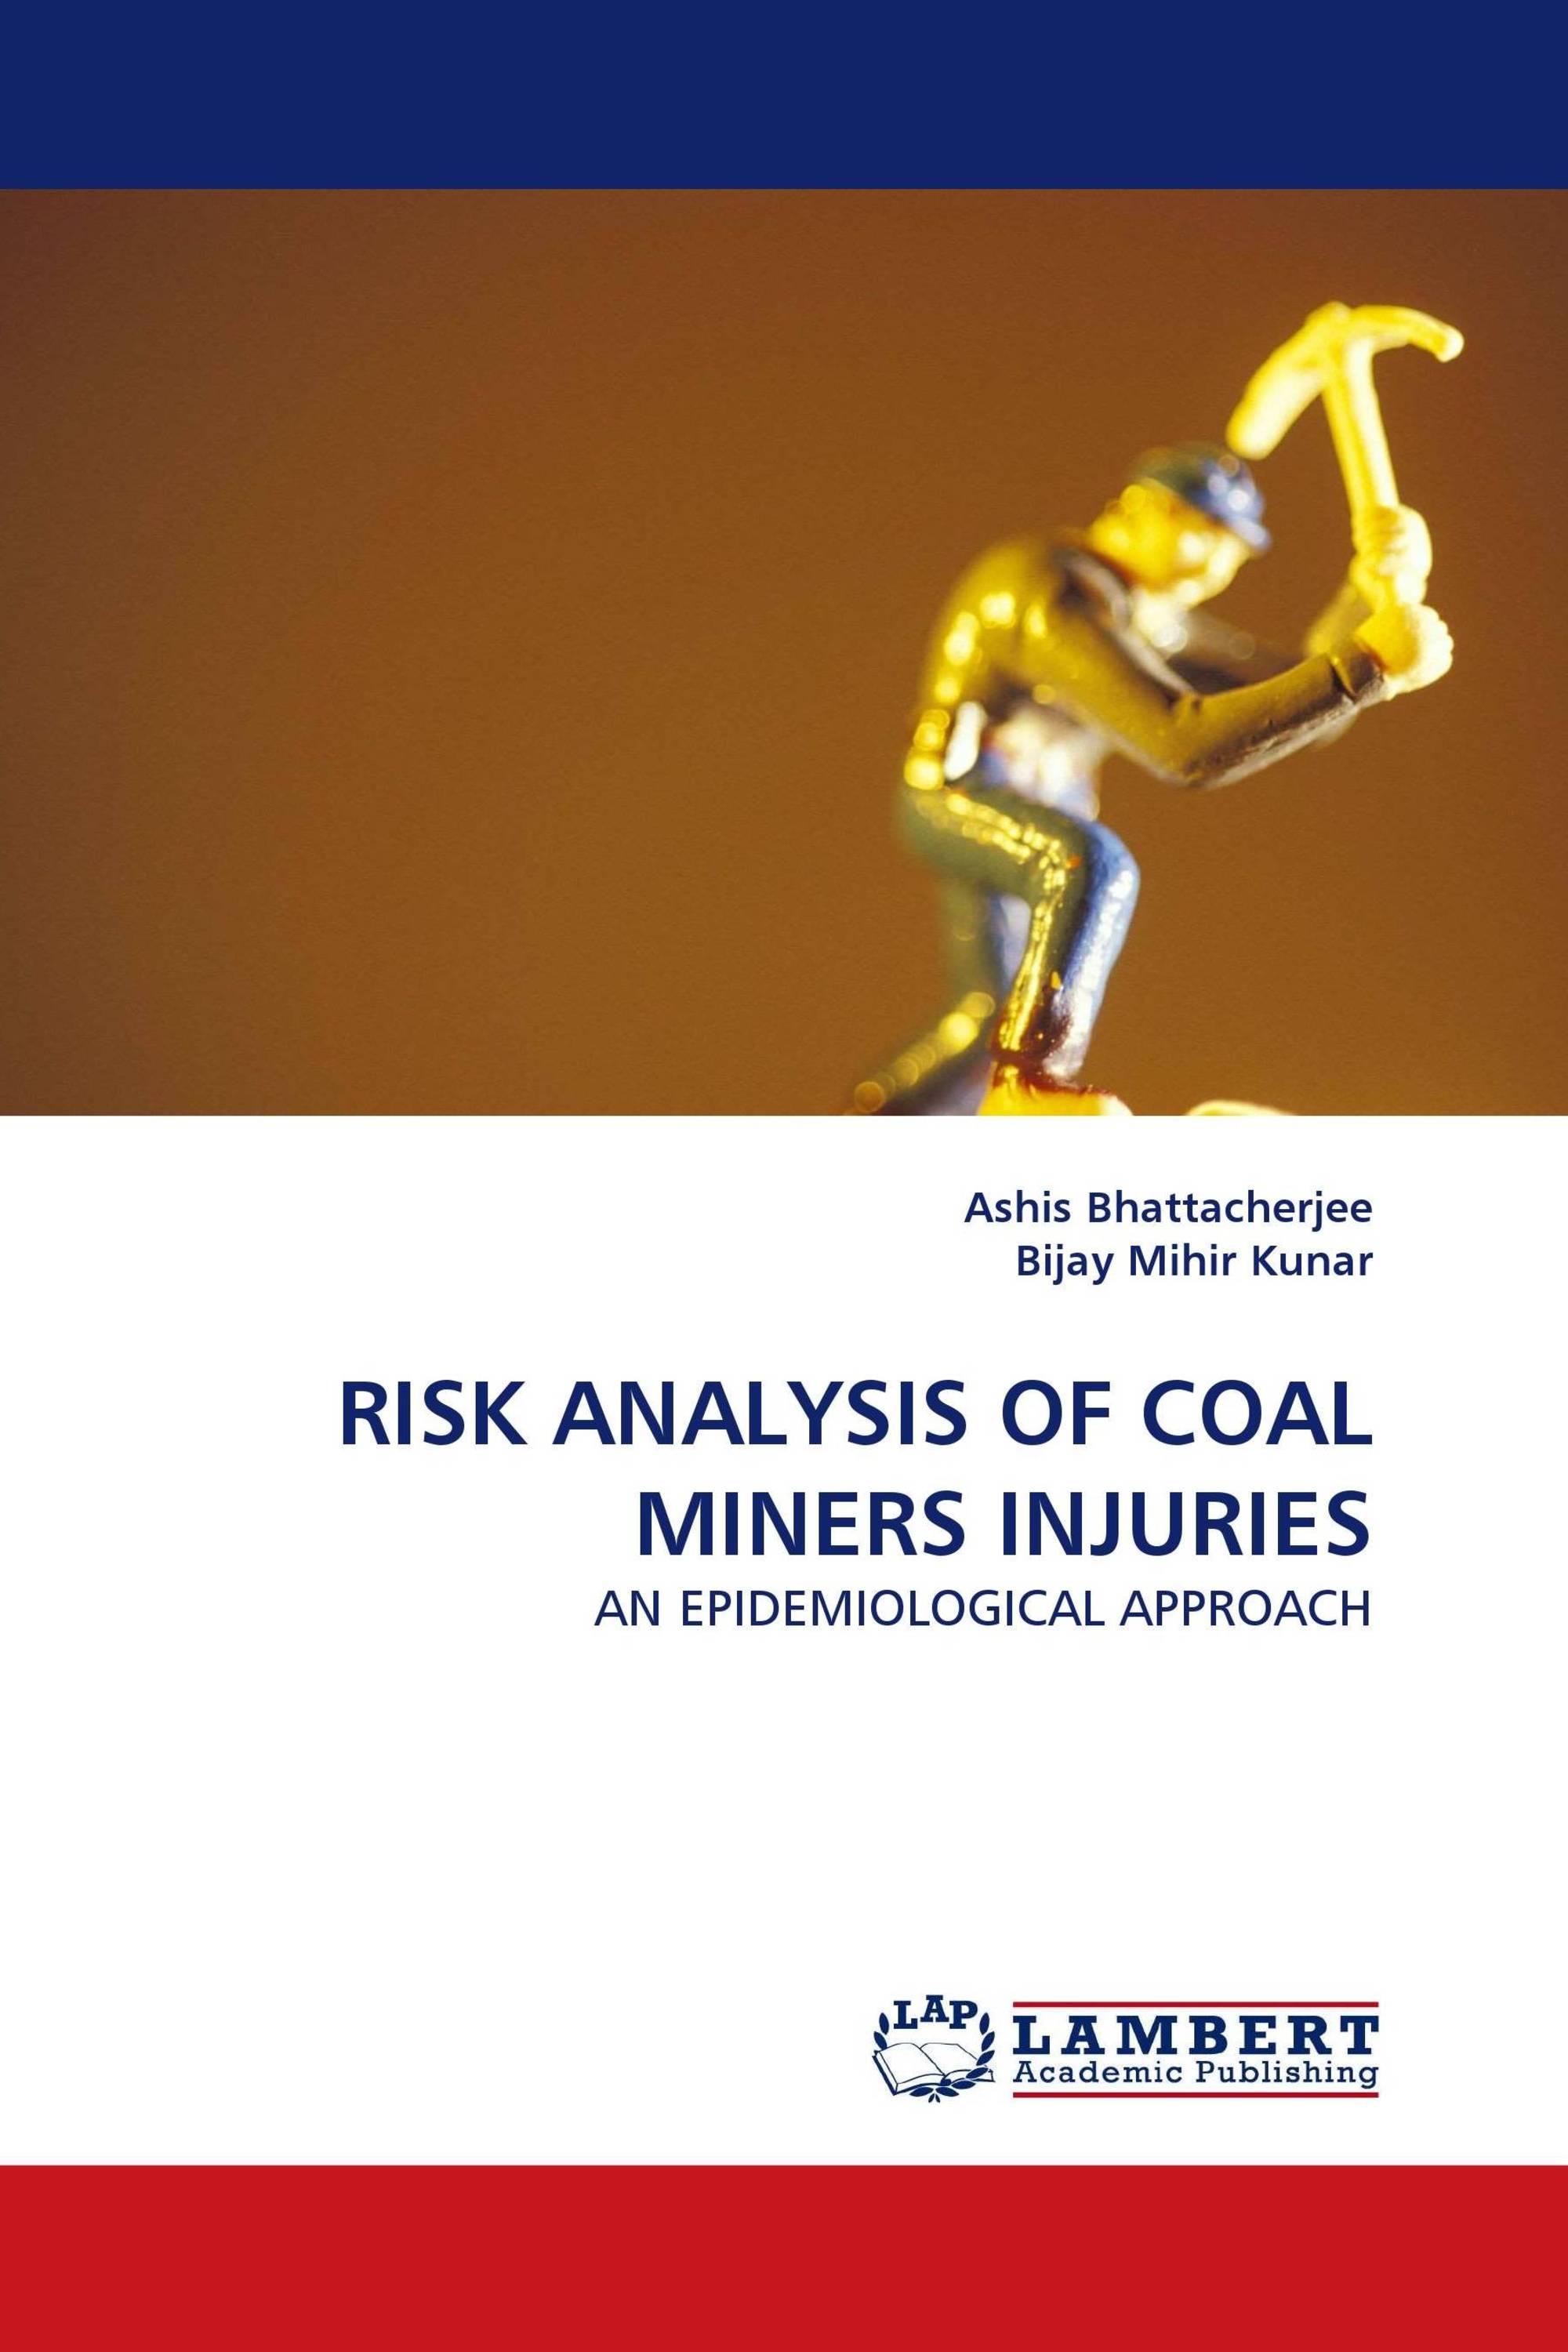 RISK ANALYSIS OF COAL MINERS INJURIES